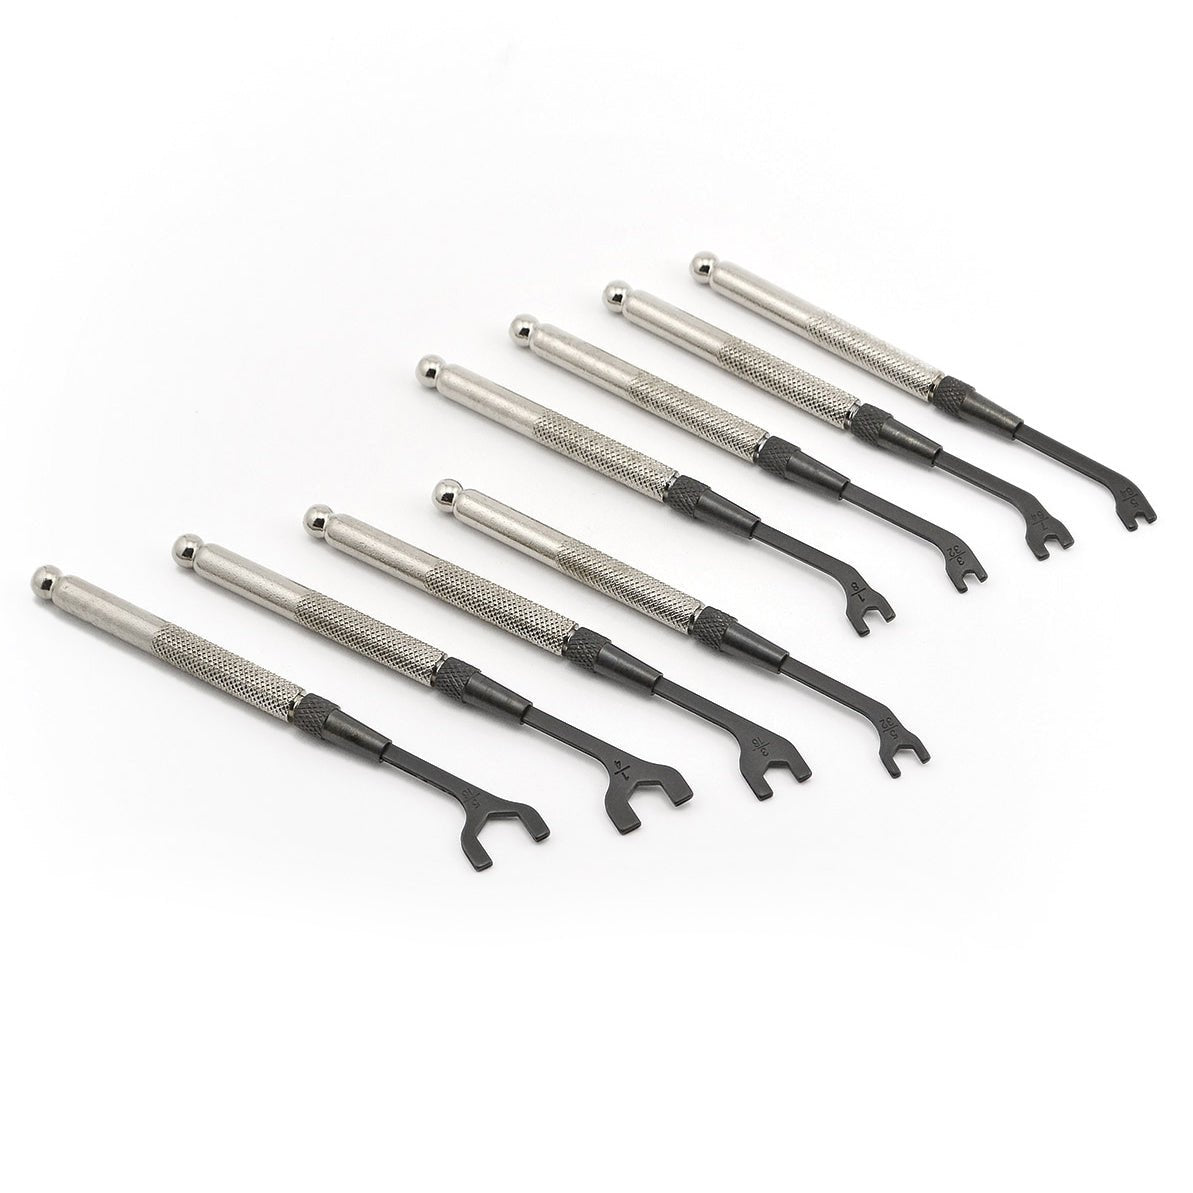 8 - piece Open Ended Wrench Inch Set - Micro - Mark Screwdrivers